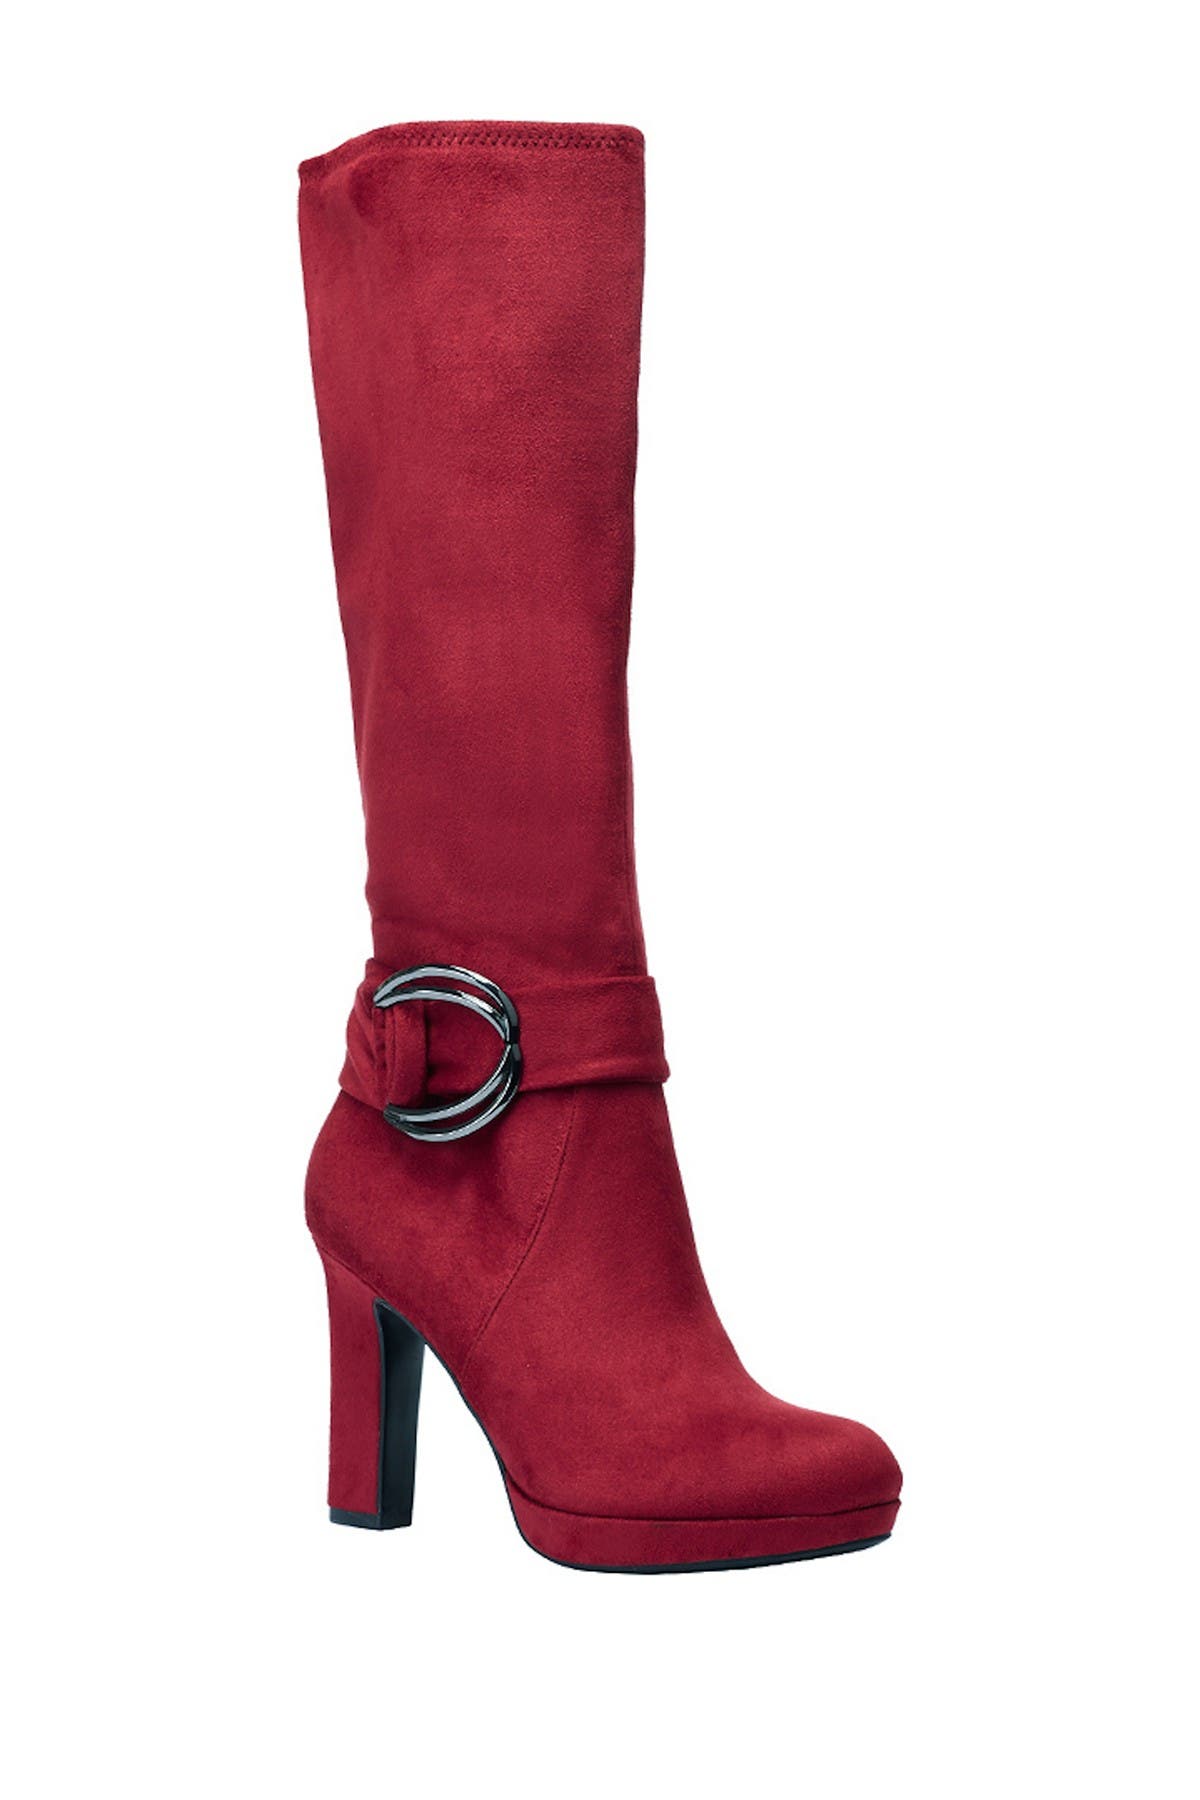 impo red boots